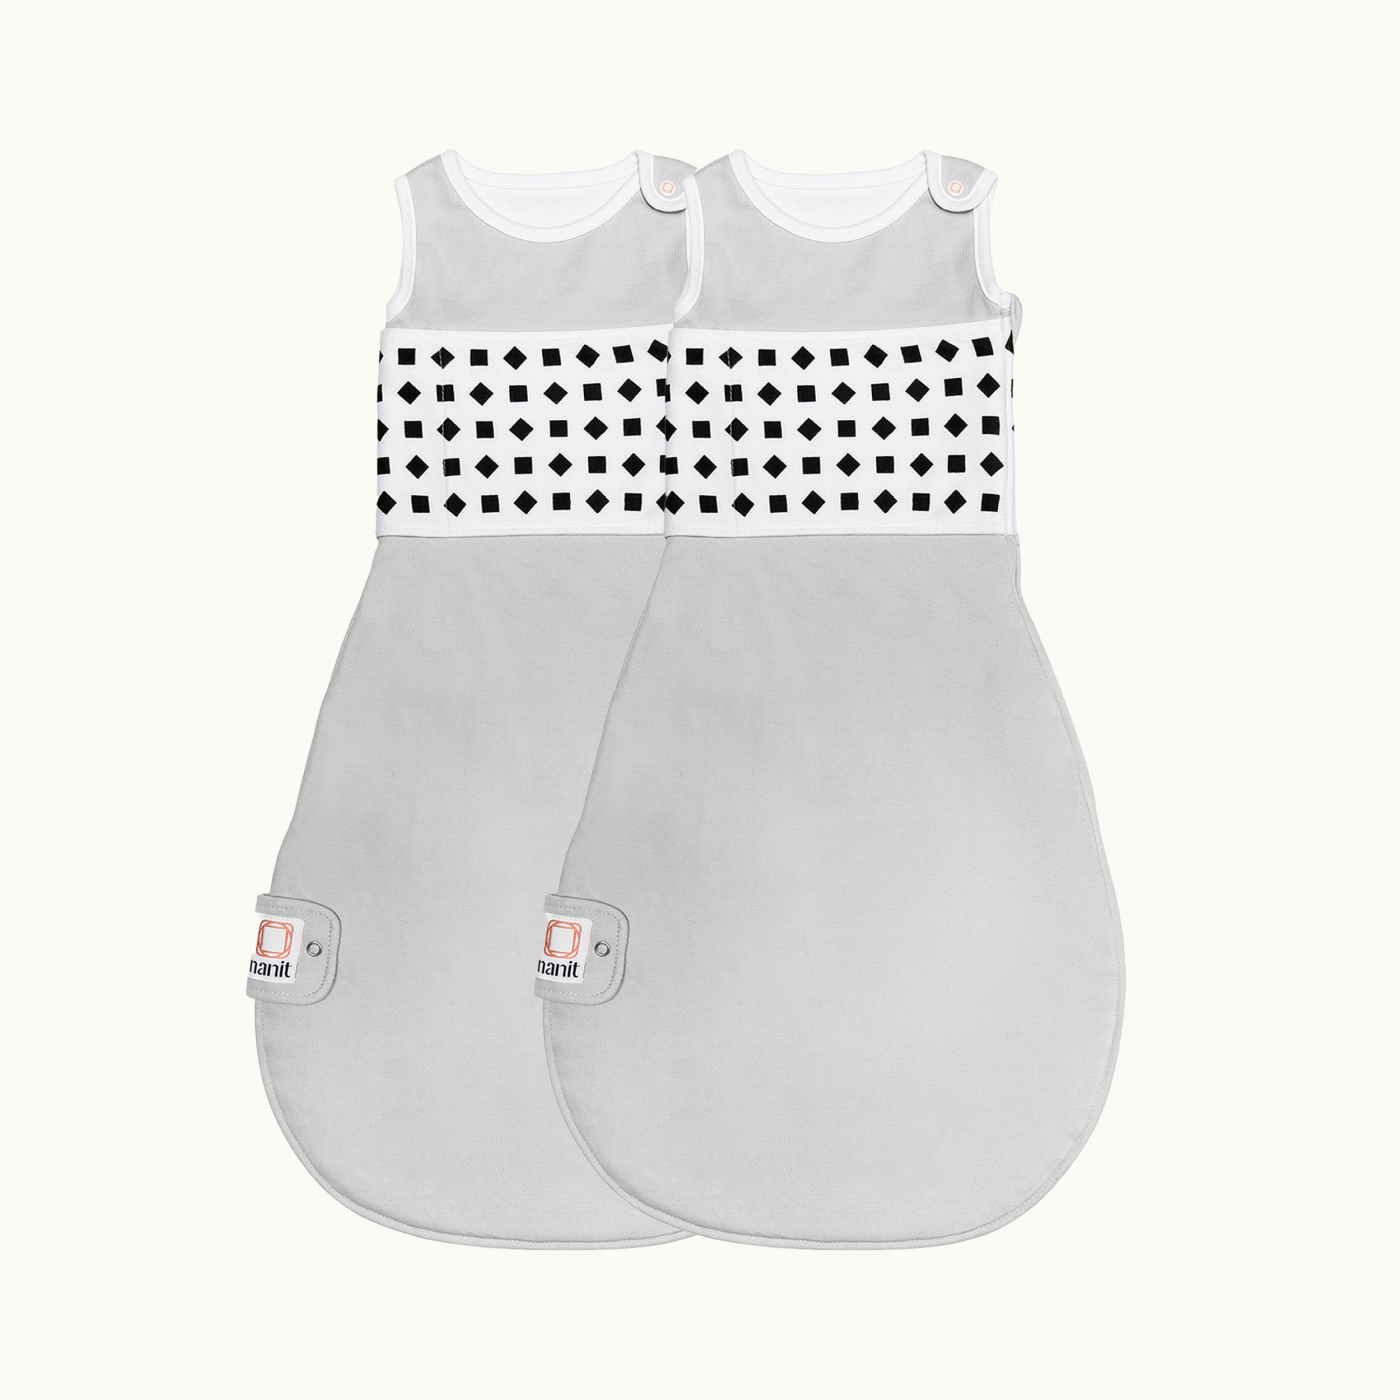 Discover Inexpensive Maternity Skirts Wear For Pregnancy Period